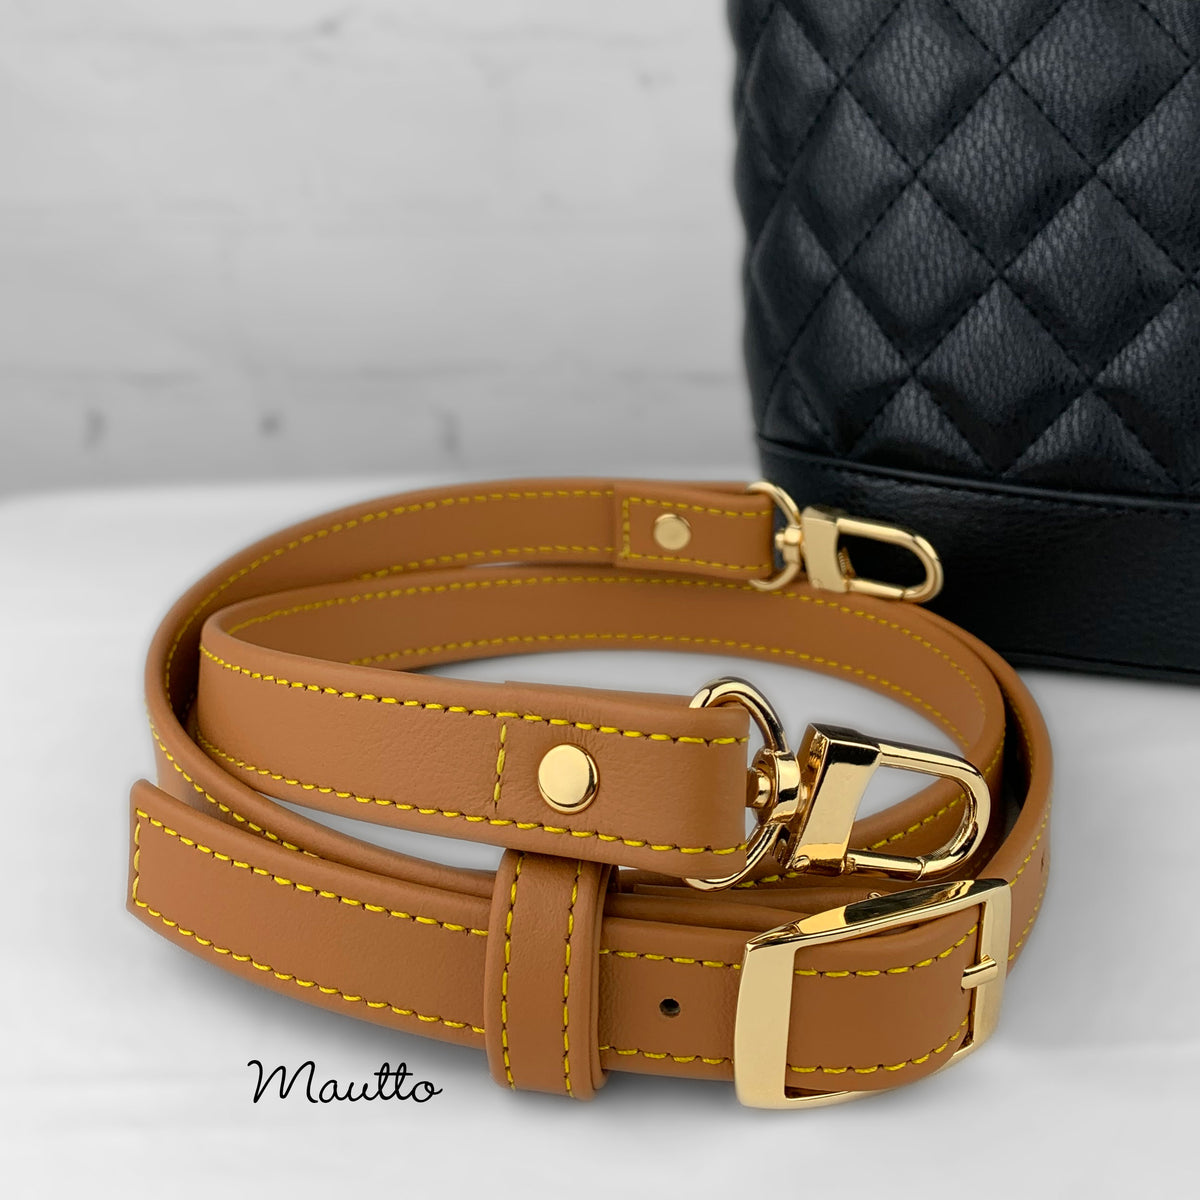 Adjustable Buckle Strap - Tan Leathers w/ Yellow Stitching - 19mm Wide –  Mautto